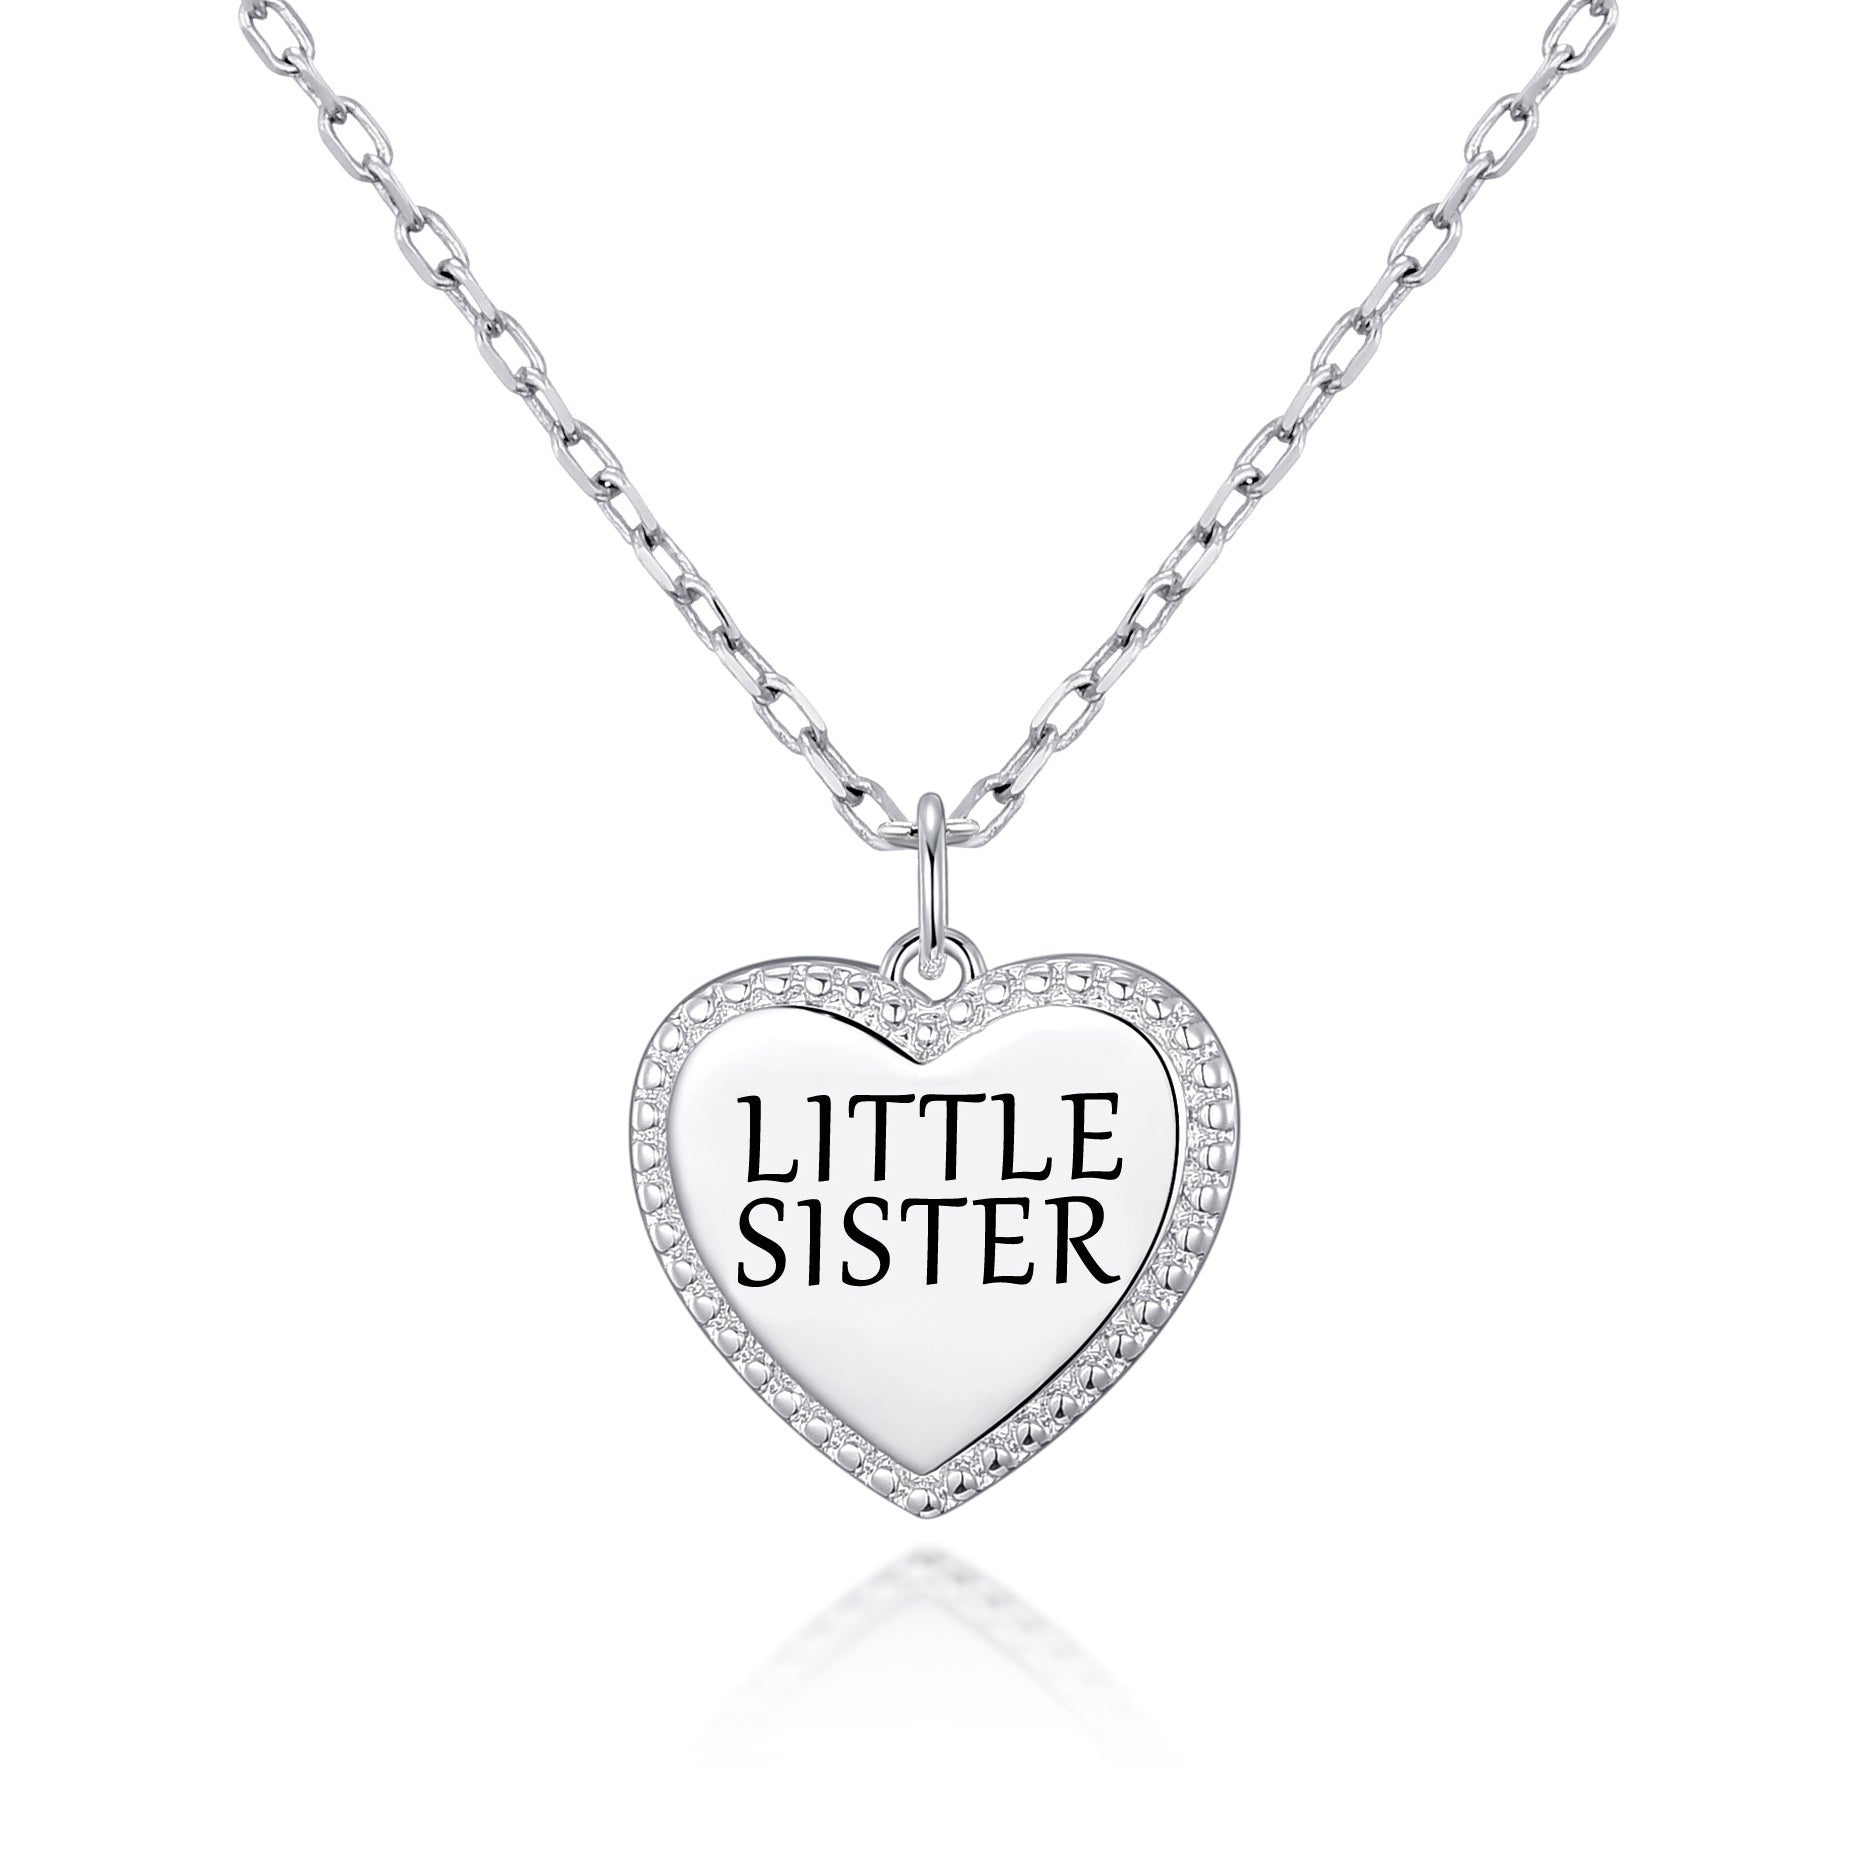 Silver Plated Filigree Heart Little Sister Necklace by Philip Jones Jewellery